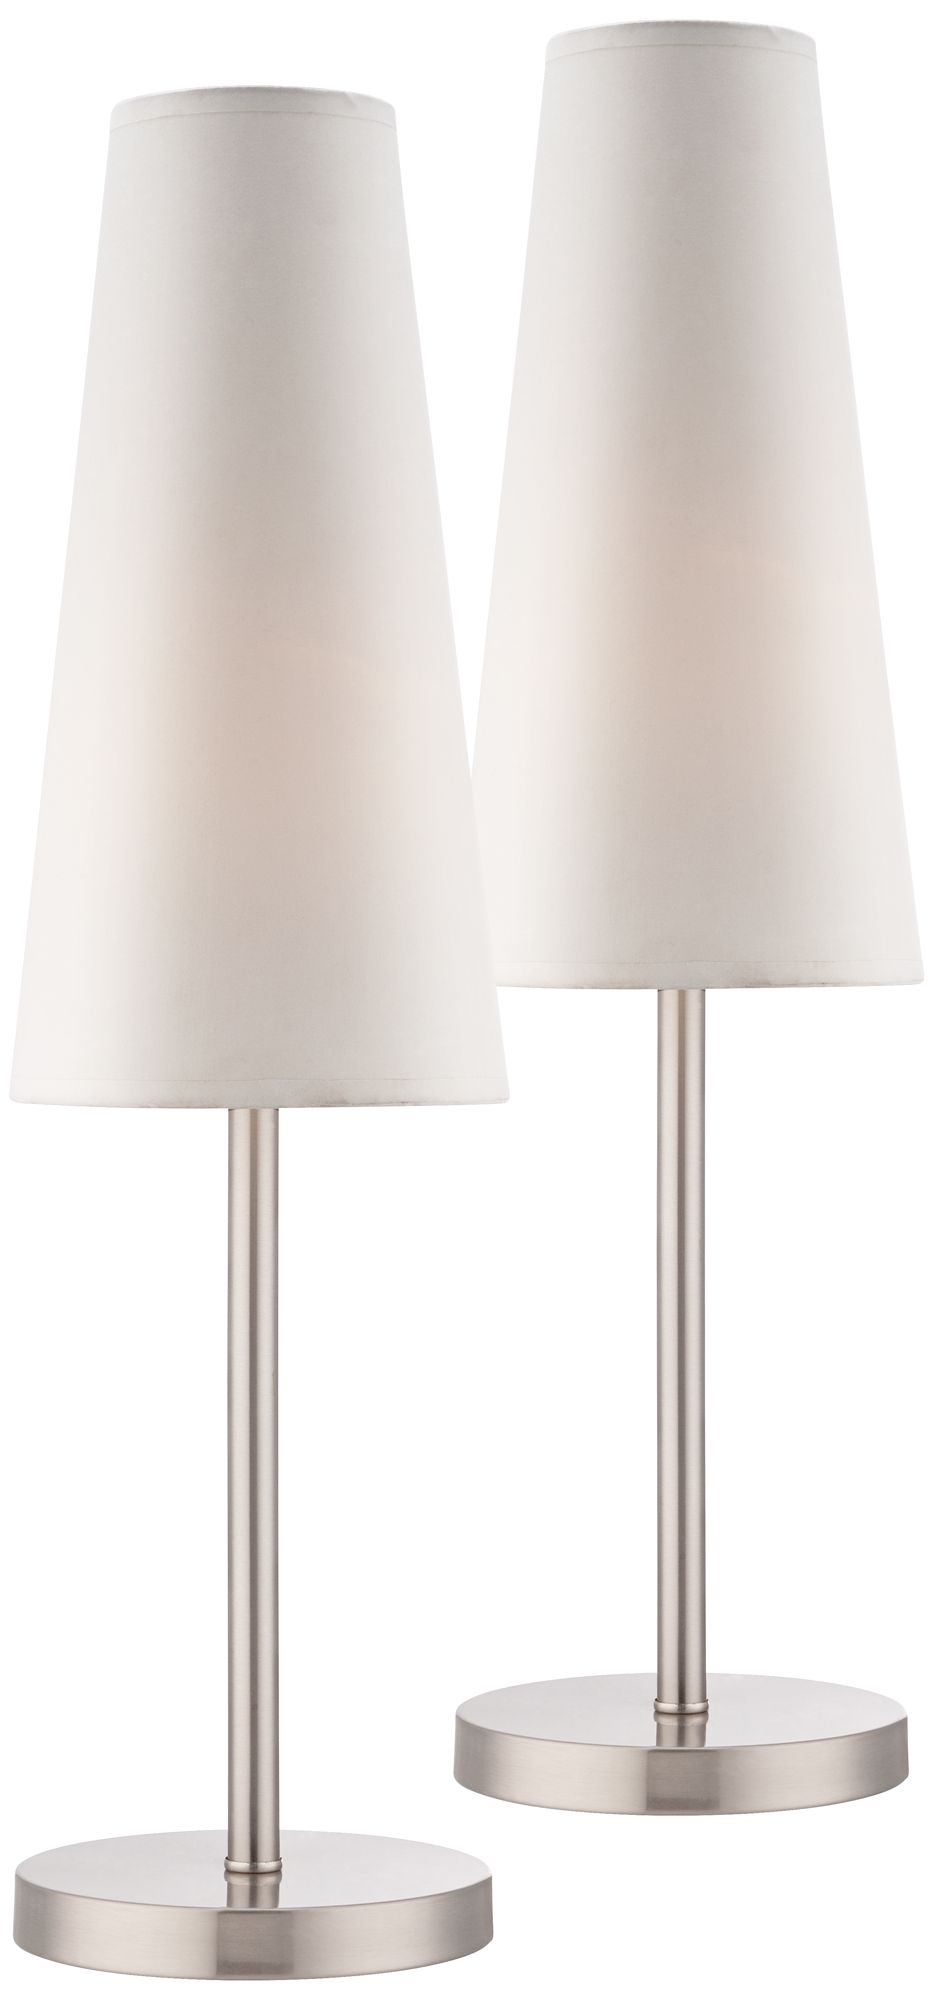 Snippet Brushed Nickel Accent Table Lamps Set of 2